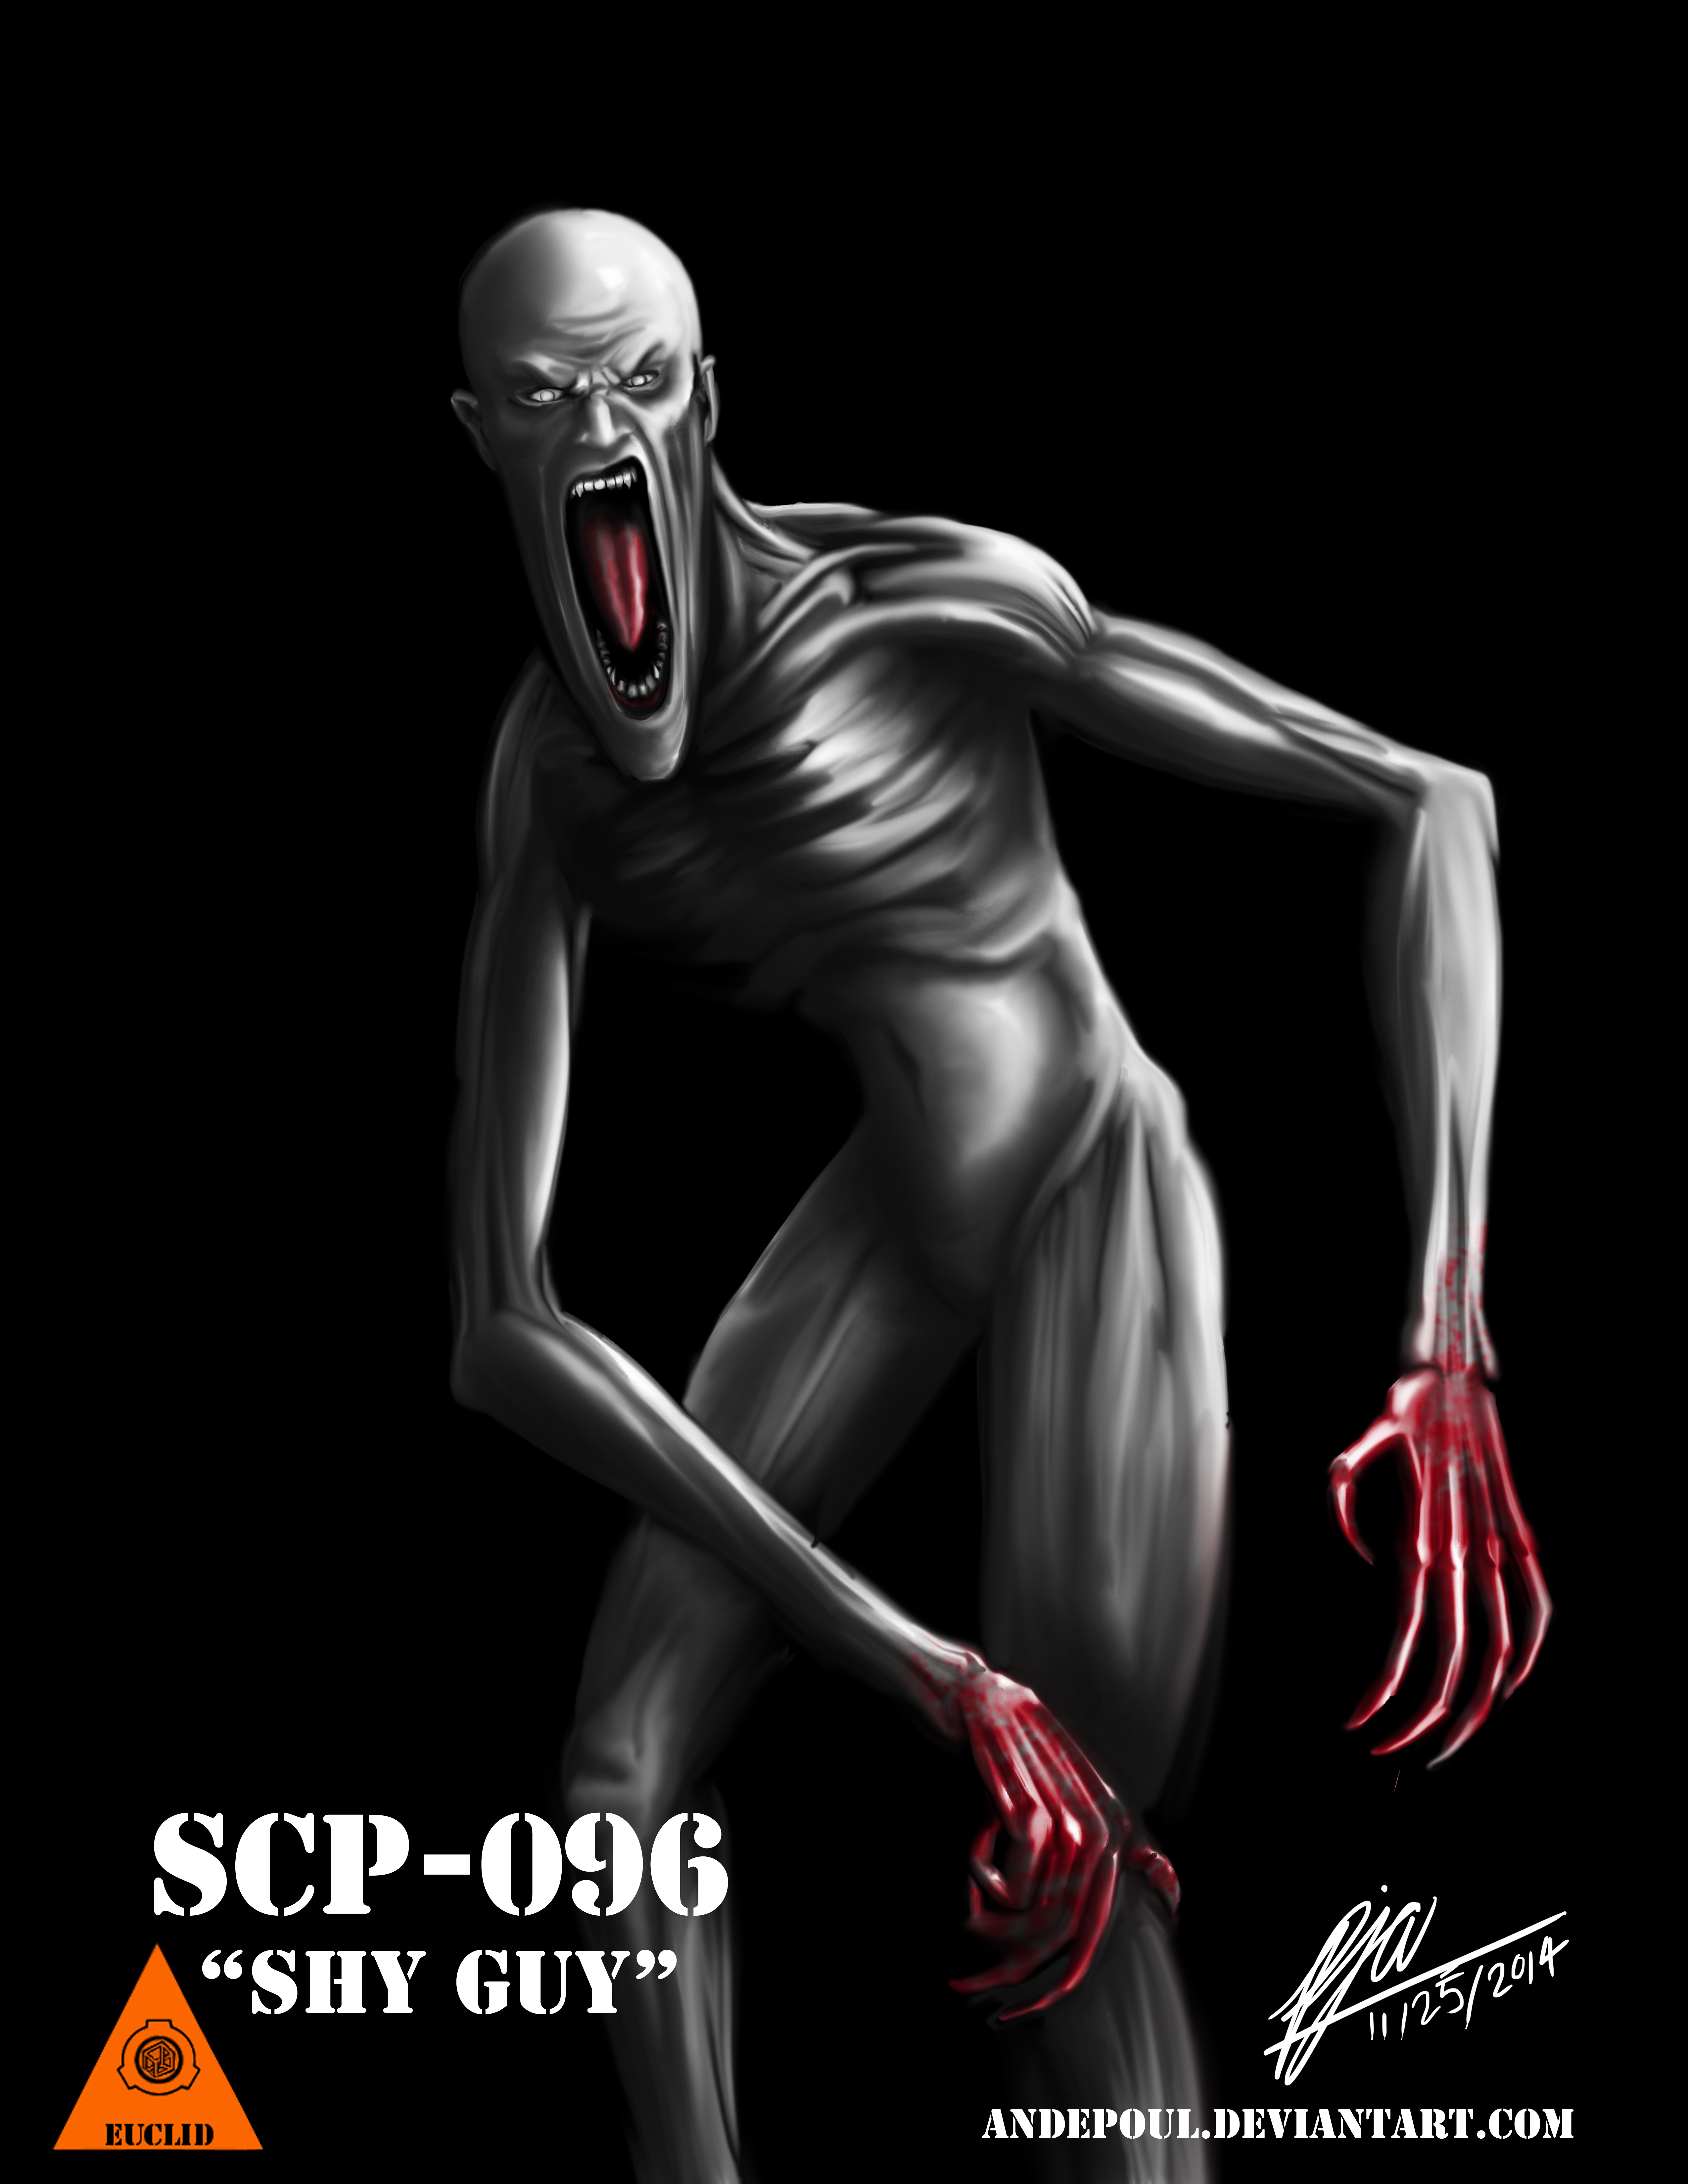 The Scp Foundation Image Shy Guy HD Wallpaper And